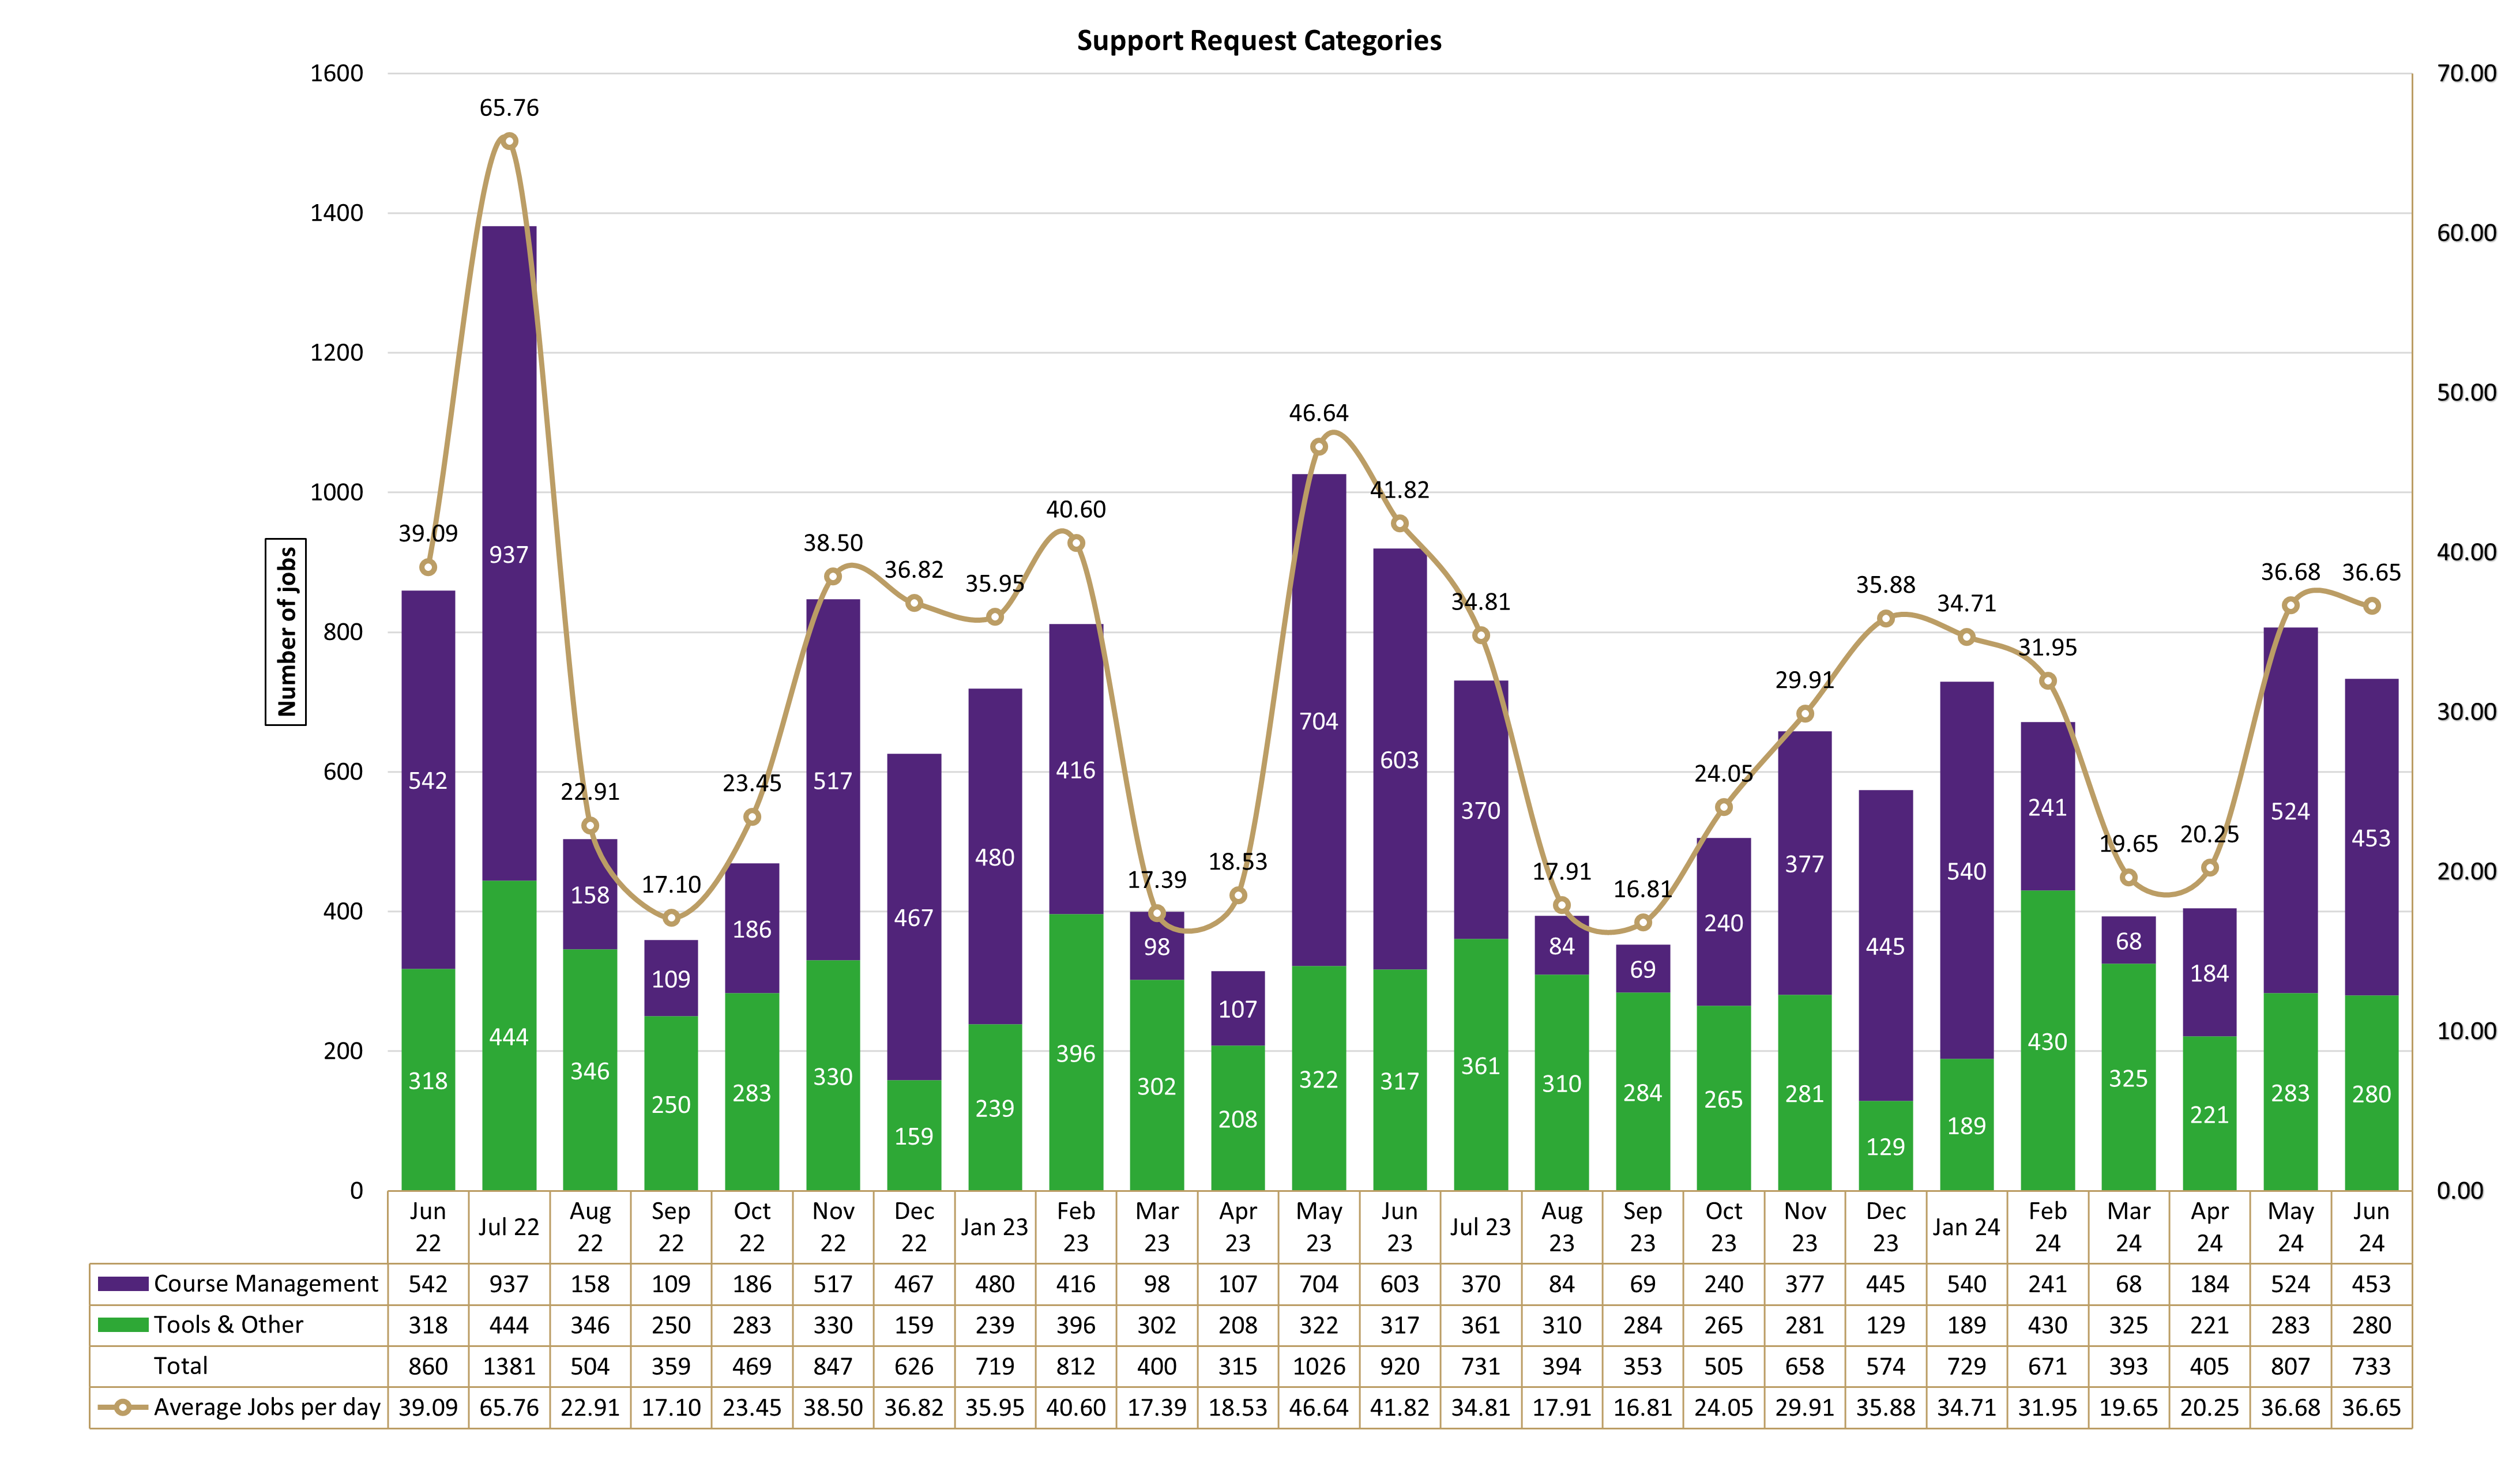 Chart of Support Request Categories from June 2022 to June 2024